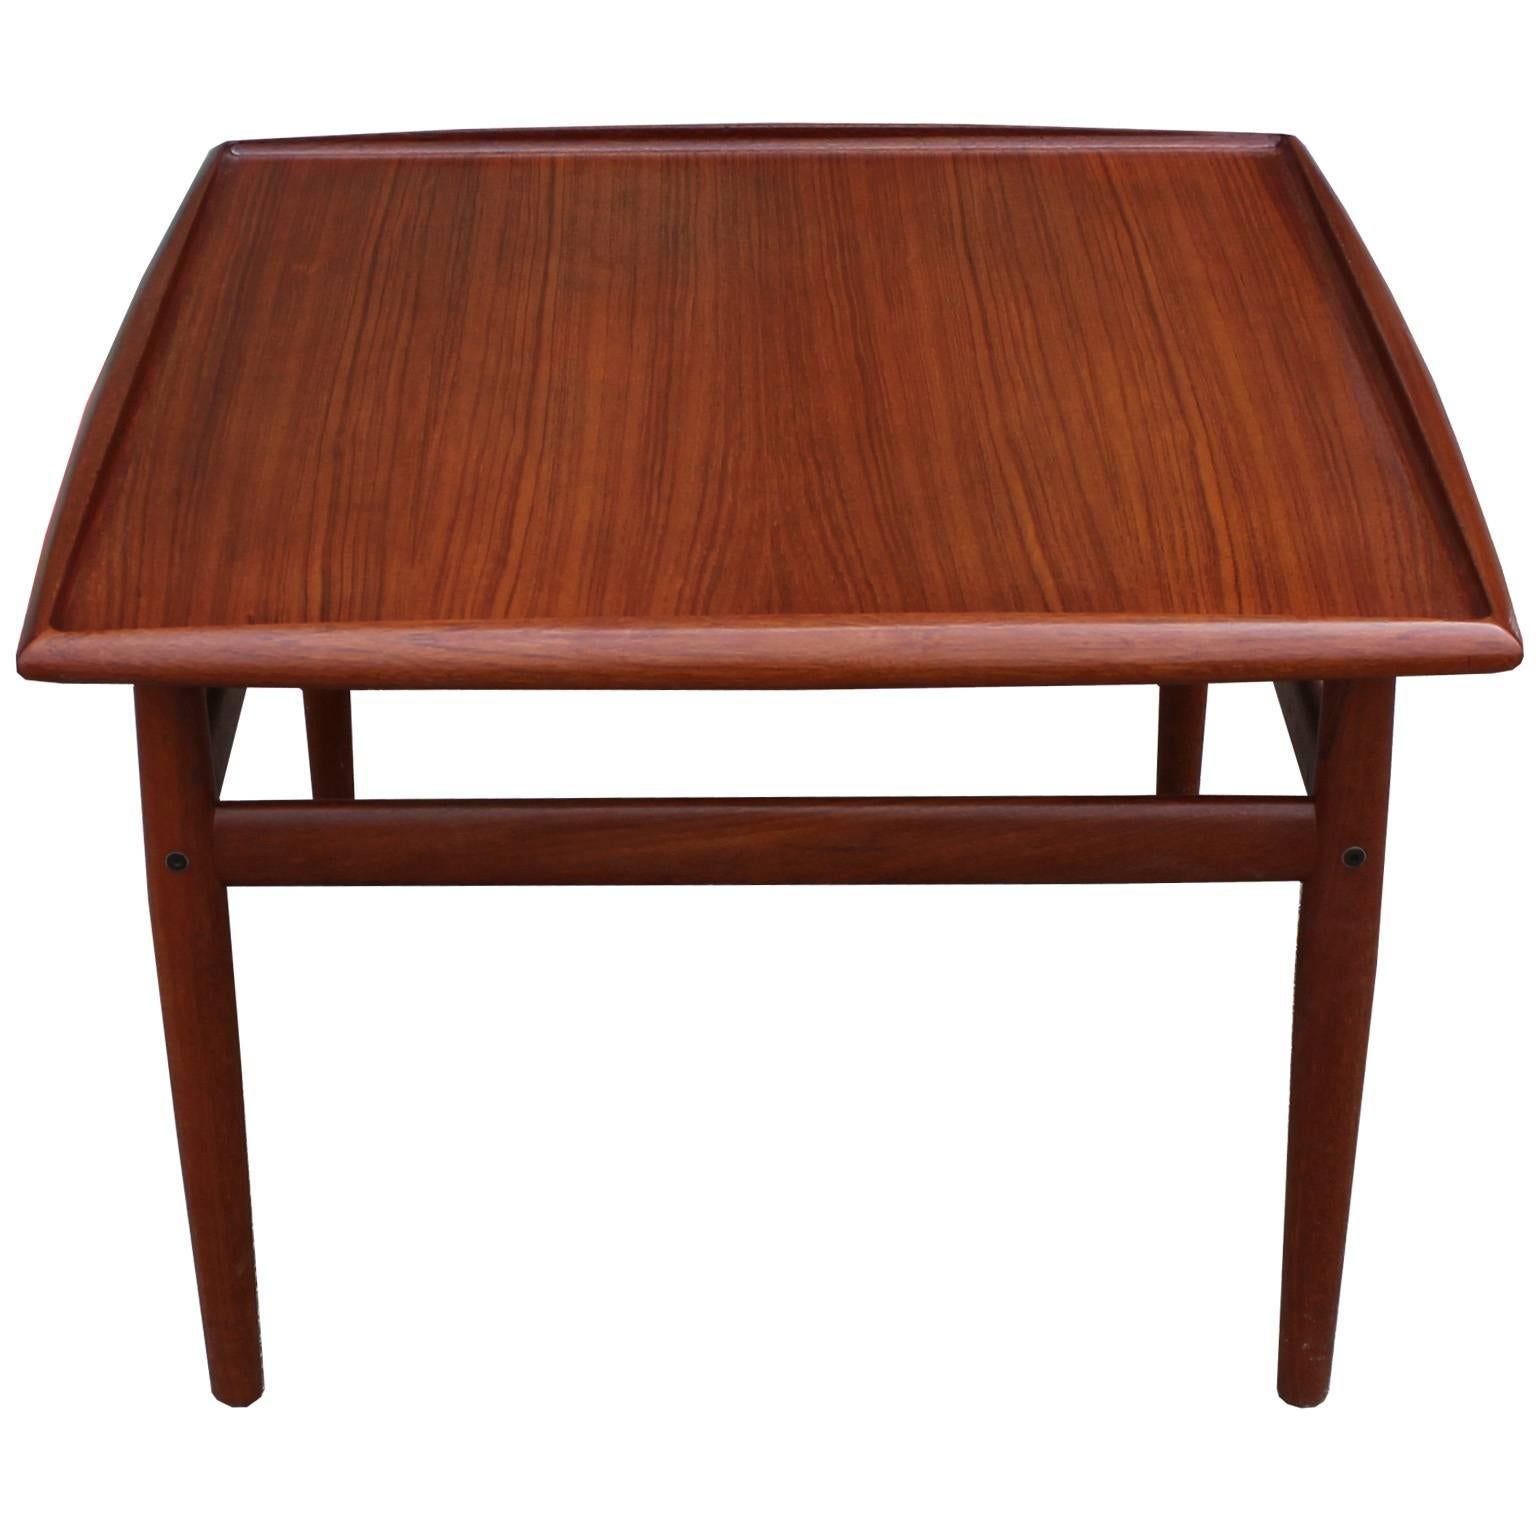 Spectacular teak end or side table designed by Danish designer Grete Jalk for Glostrup. Square table is in excellent condition with beautiful graining.